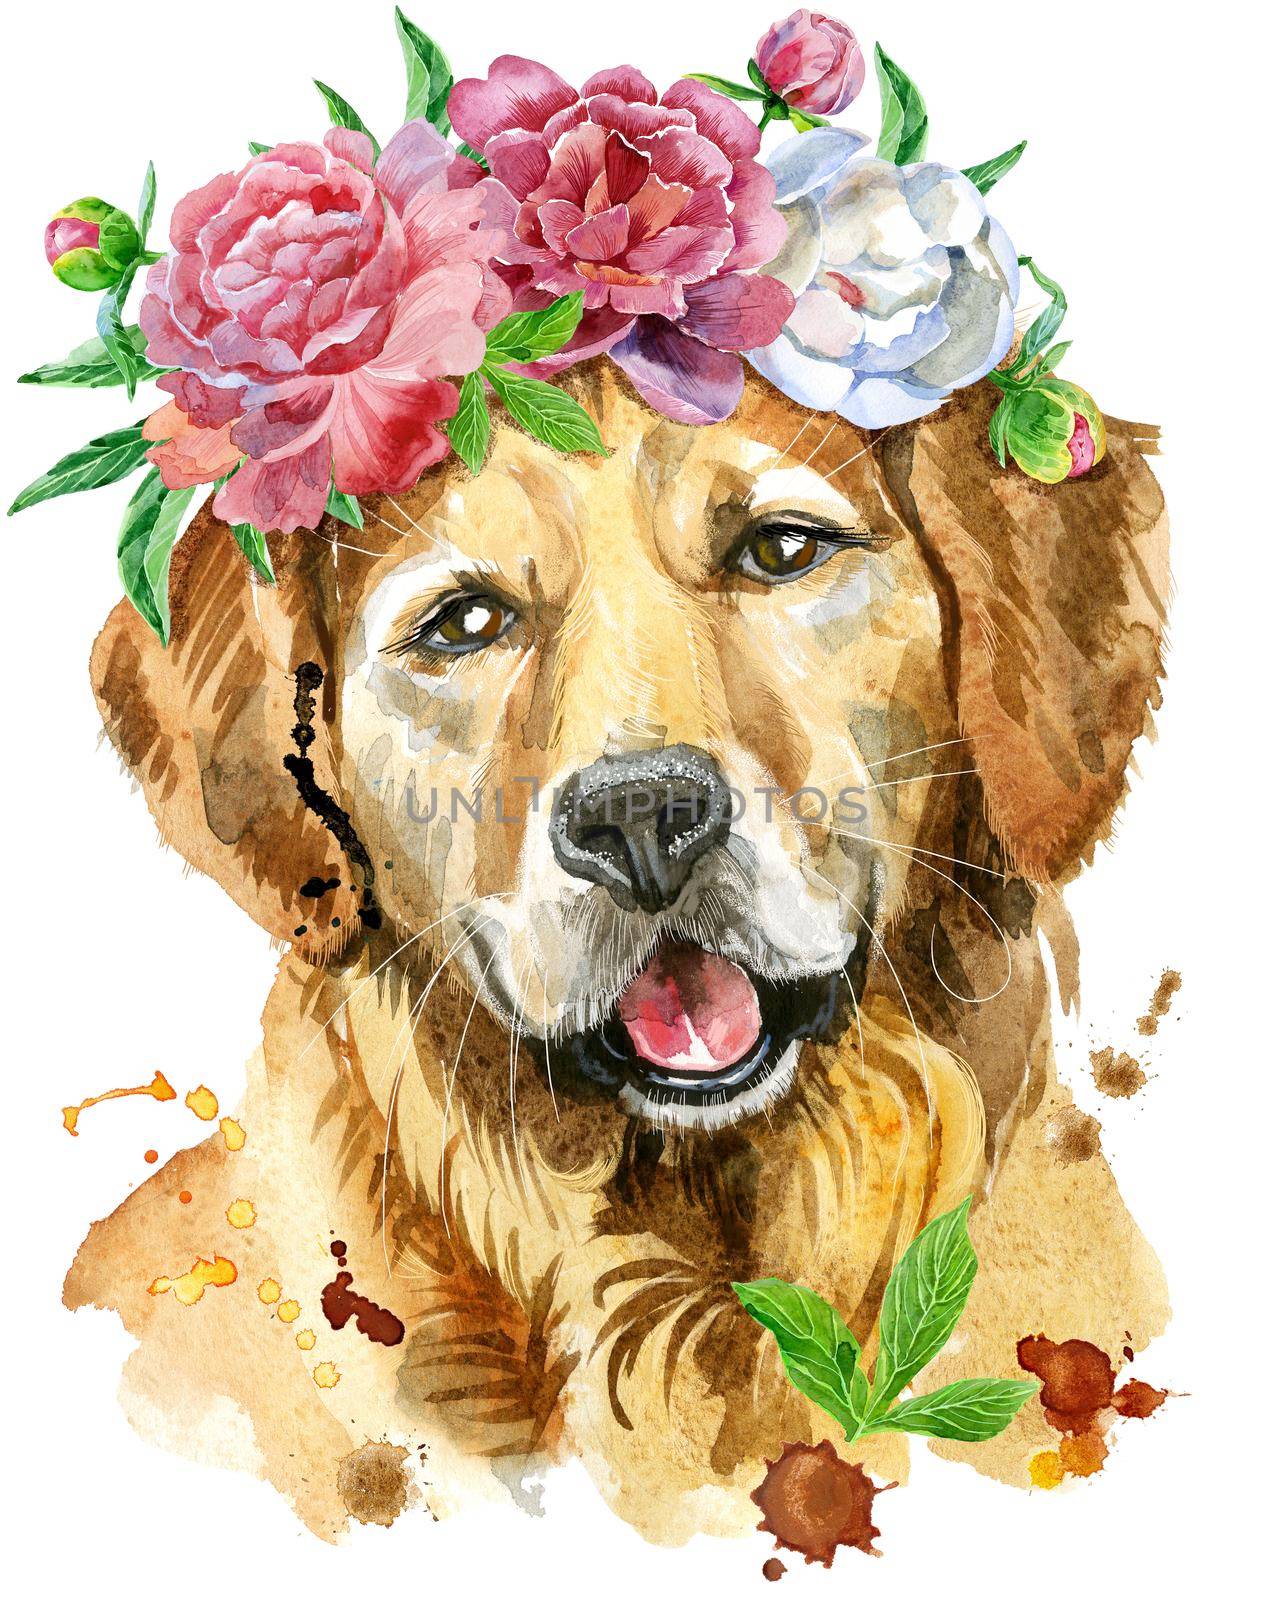 Cute Dog. Dog T-shirt graphics. watercolor golden retriever illustration in a wreath of peonies